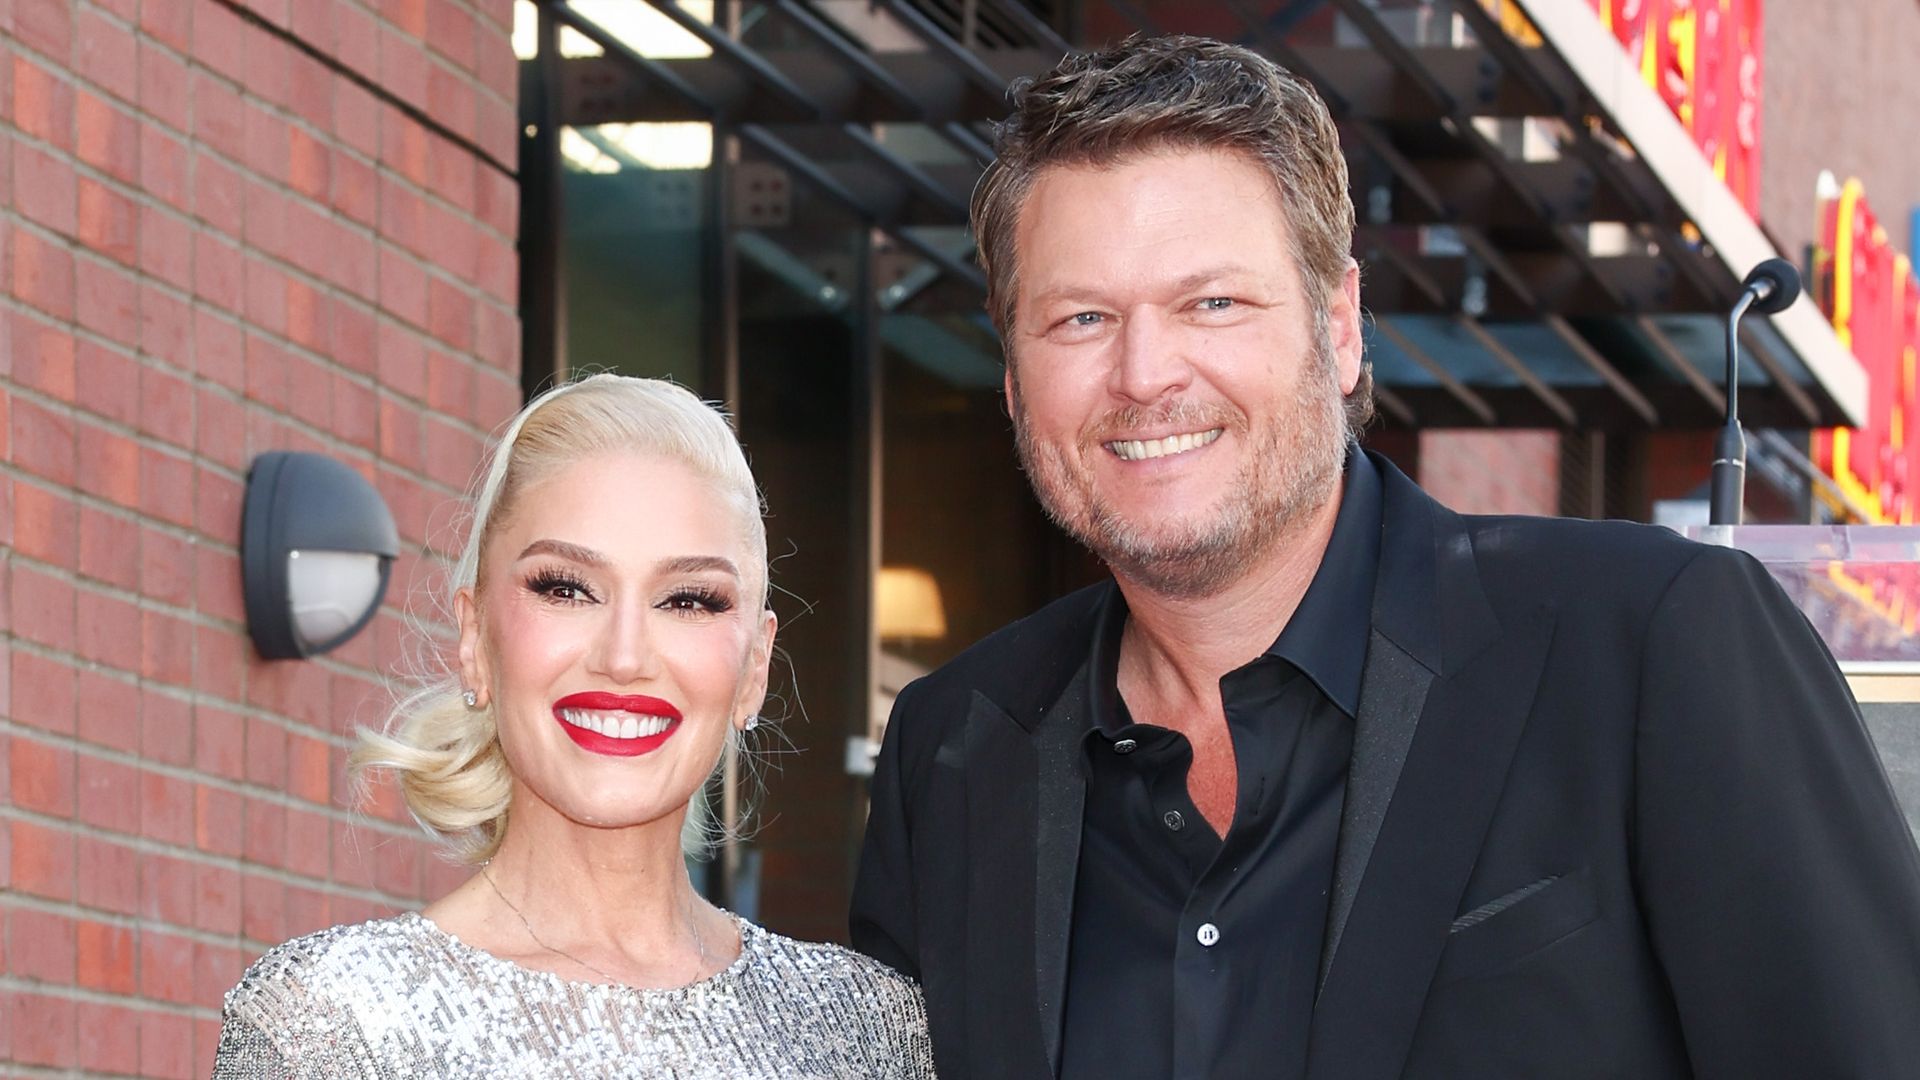 Gwen Stefani and Blake Shelton at the star ceremony where Gwen Stefani is honored with a star on the Hollywood Walk of Fame in Los Angeles, California on October 19, 2023.